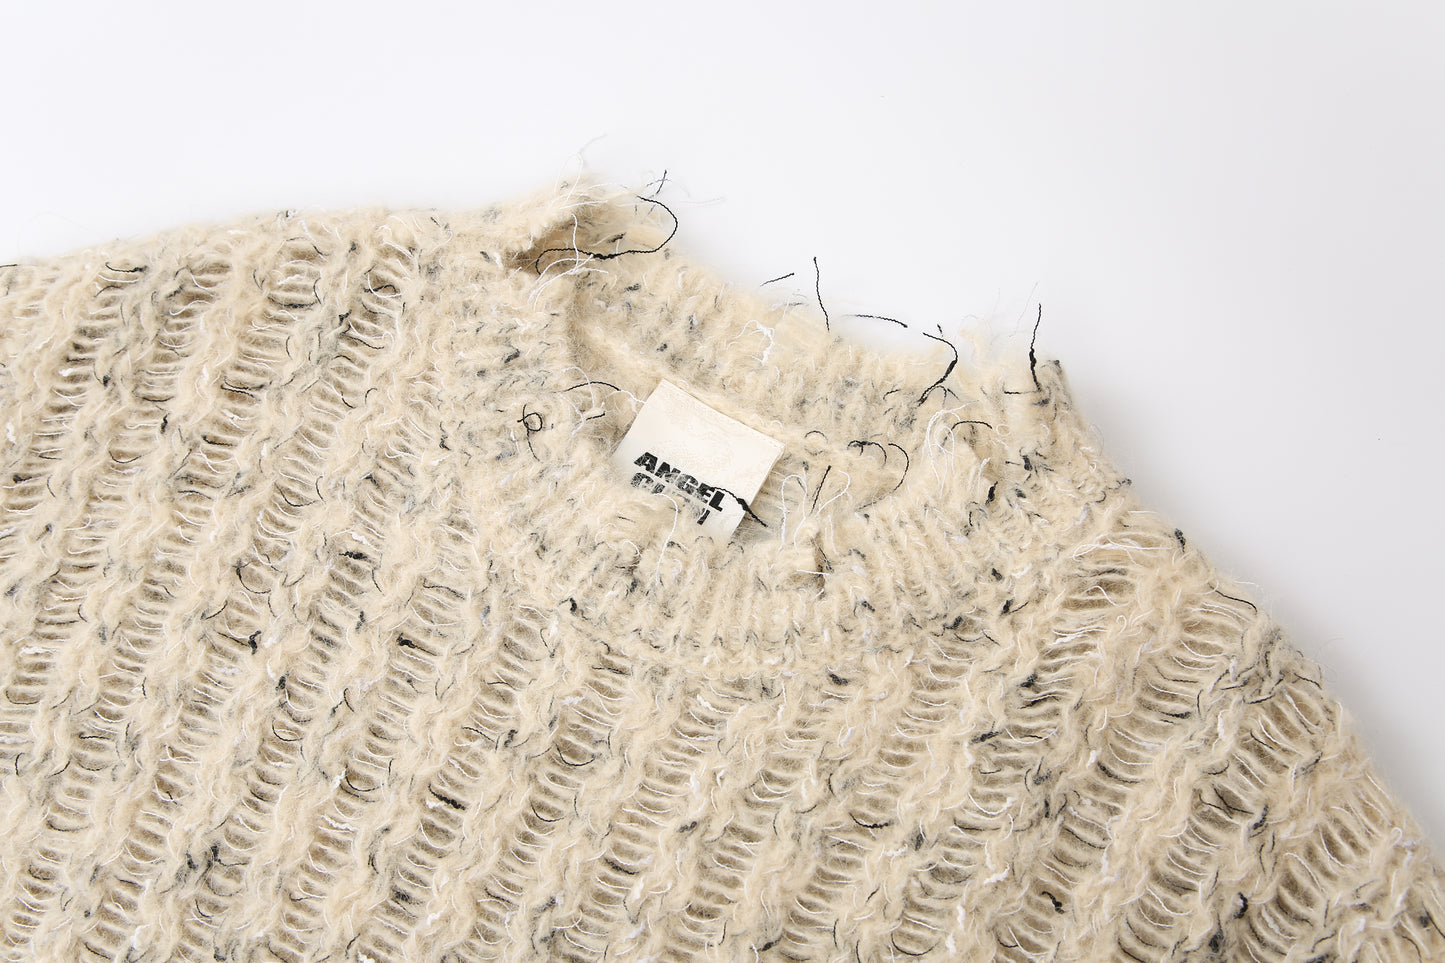 OPEN KNIT DISTRESSED SWEATER